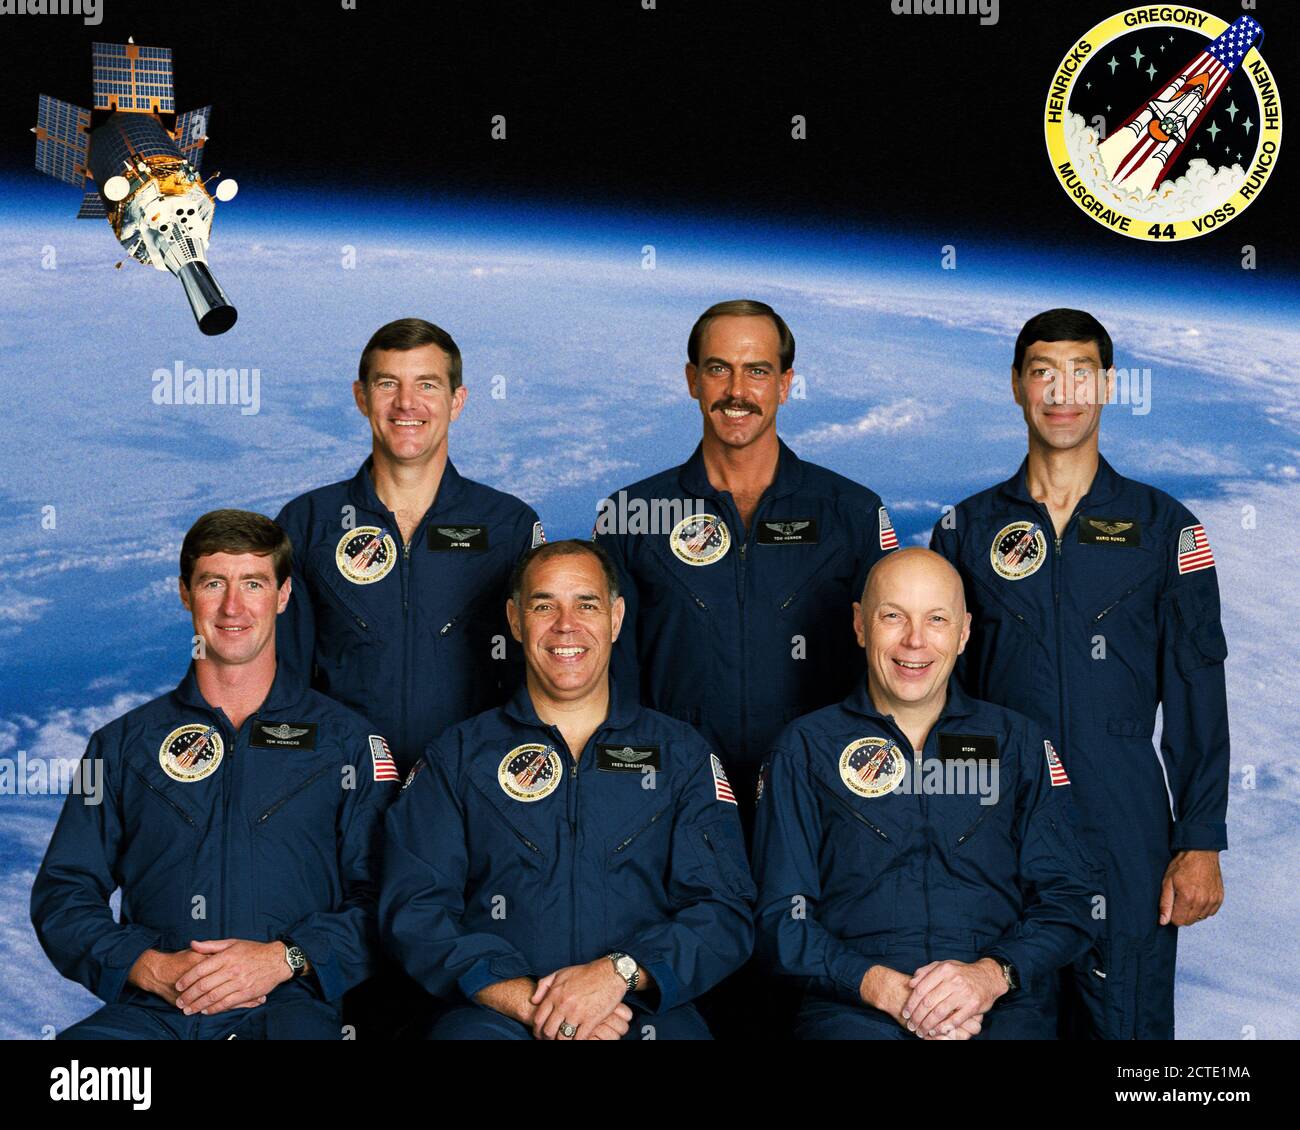 (July 1991) --- These are the six crew members assigned to fly onboard the Space Shuttle Atlantis for NASA's STS 44 mission, scheduled for later this year. Astronaut Frederick D. Gregory (center, front row) is mission commander. He is flanked by astronauts Terence T. (Tom) Henricks (left), pilot; and F. Story Musgrave, mission specialist. On the back row are astronaut James S. Voss, mission specialist; payload specialist Thomas J. Hennen of the U.S. Army; and astronaut Mario Runco Jr., mission specialist. Stock Photo